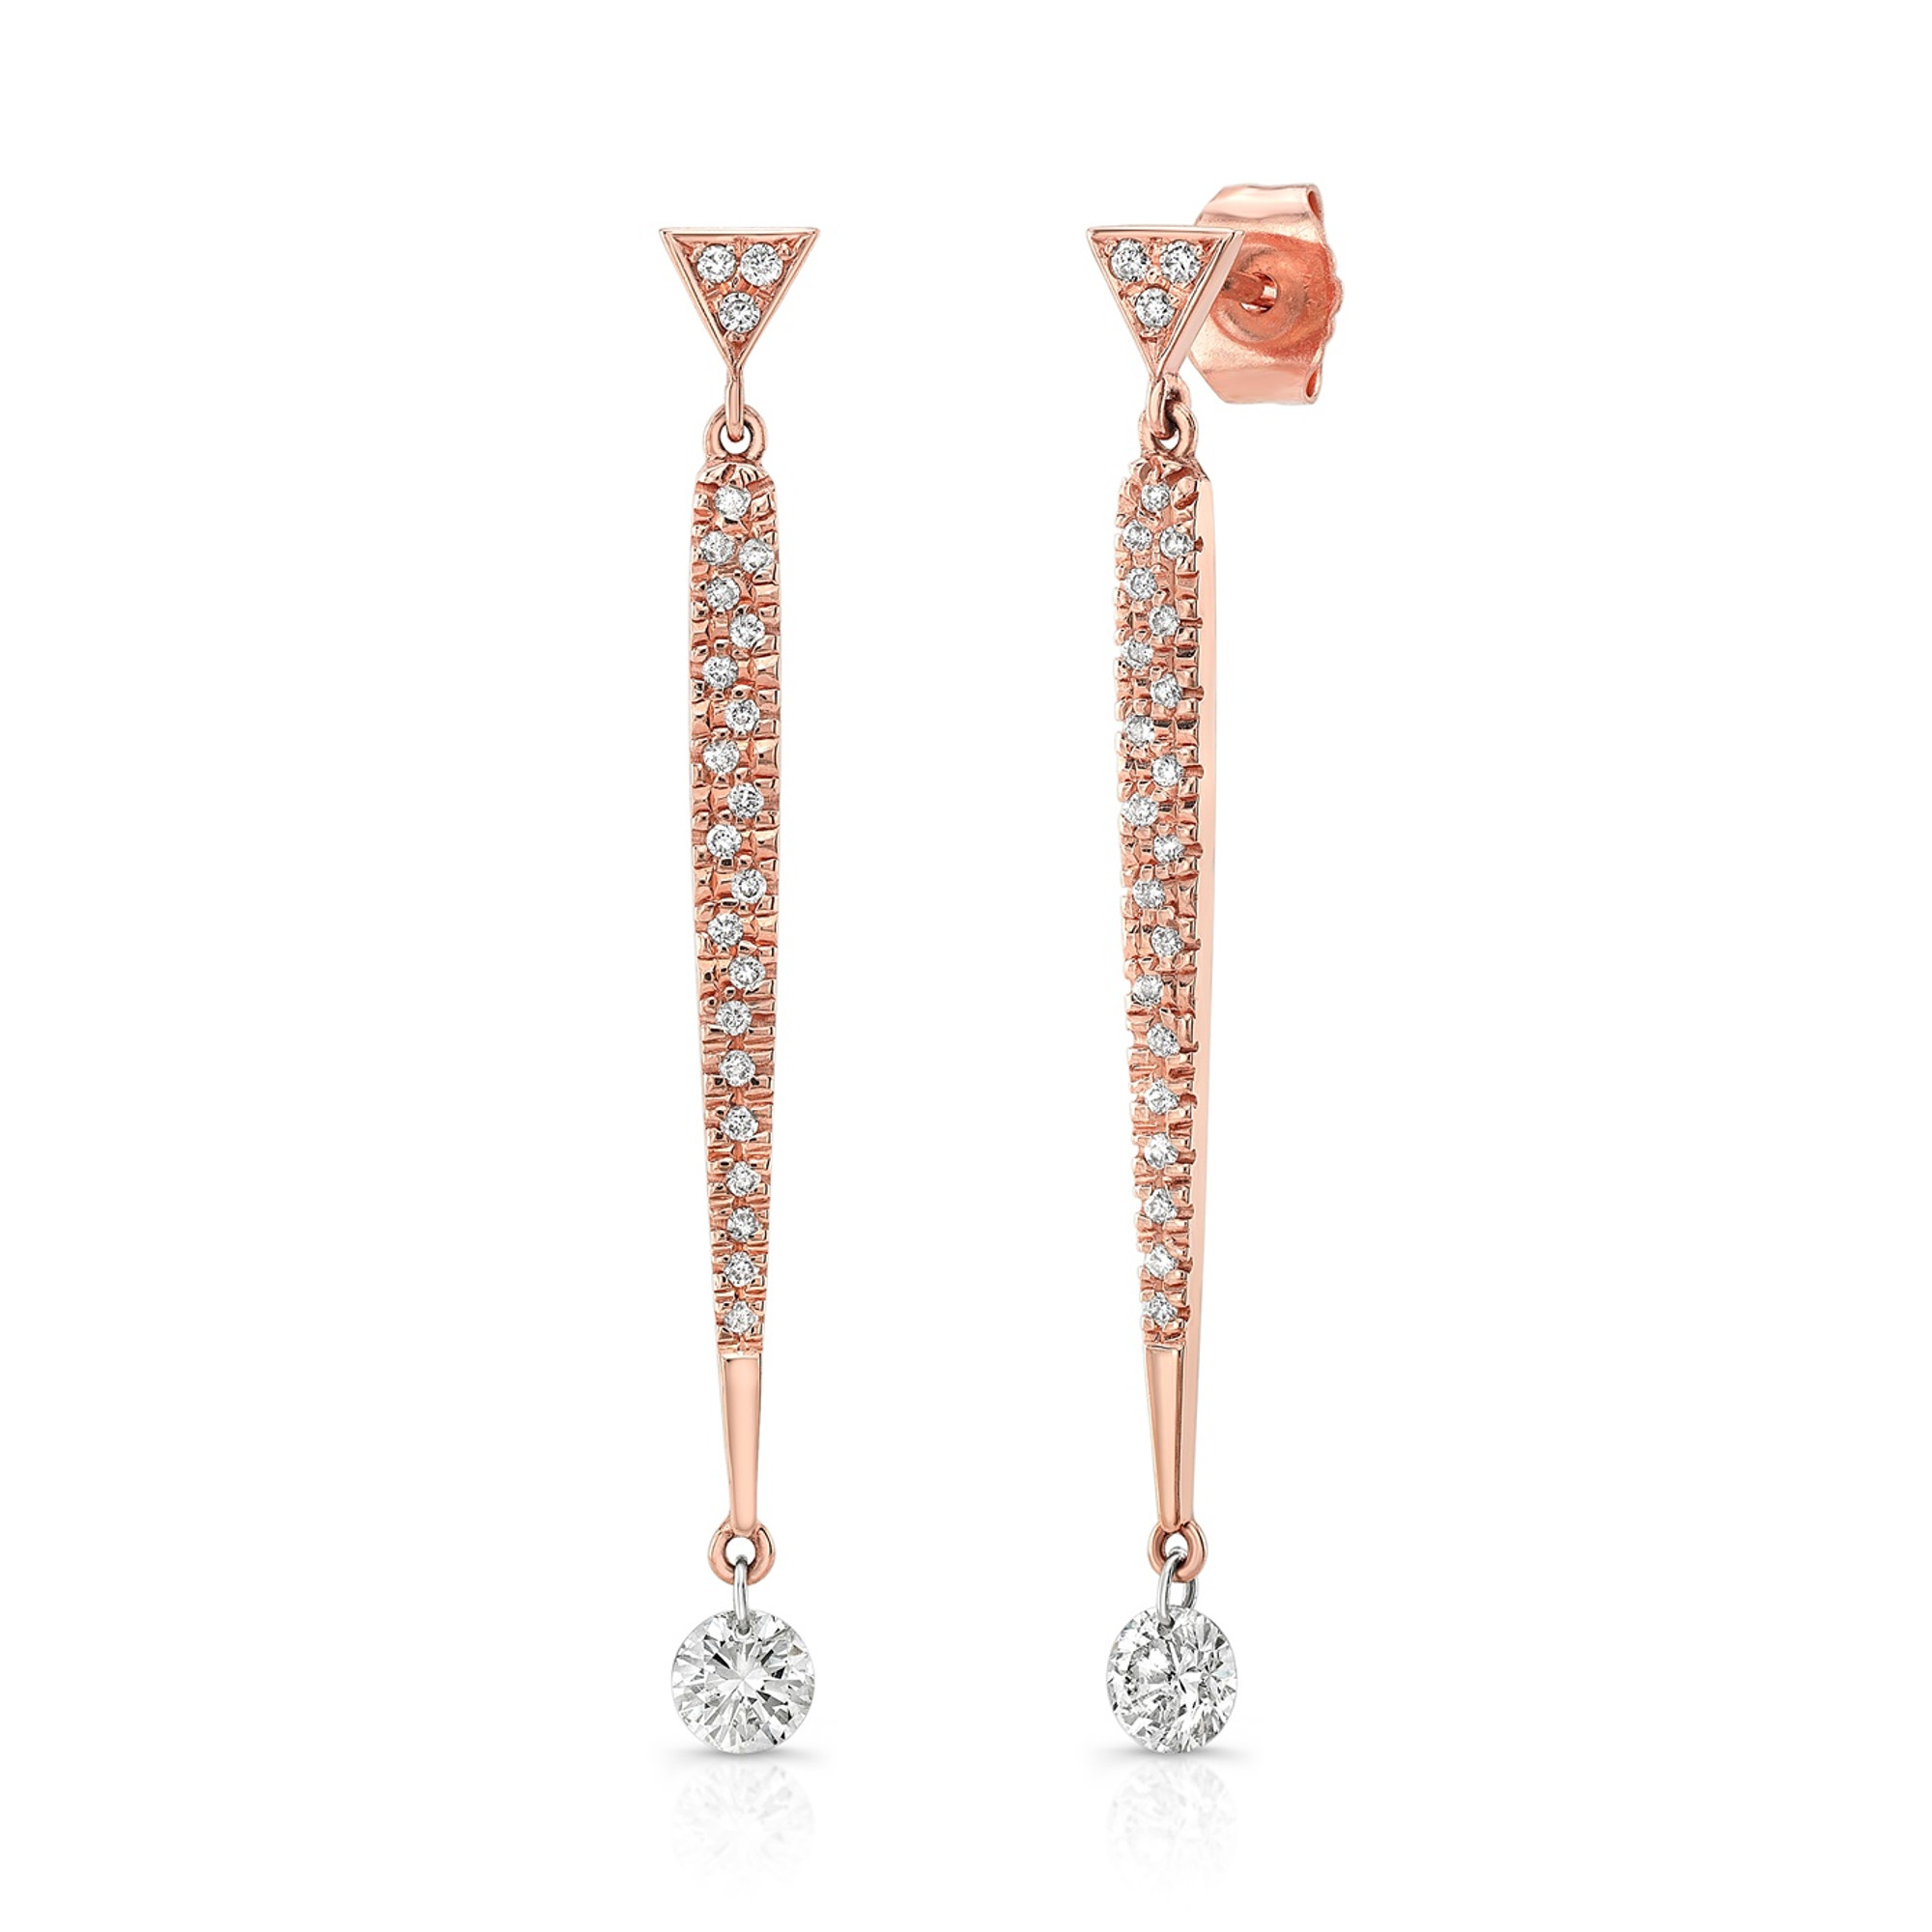 Amazon.com: Rose Gold Threader Earrings for Women, 14K Rose Gold Filled,  1.5in, Spiral Earrings for Women Hypoallergenic, Dangle Drop Earrings,  Threader Earrings, Lightweight Earrings (14K Rose Gold Filled) : Handmade  Products